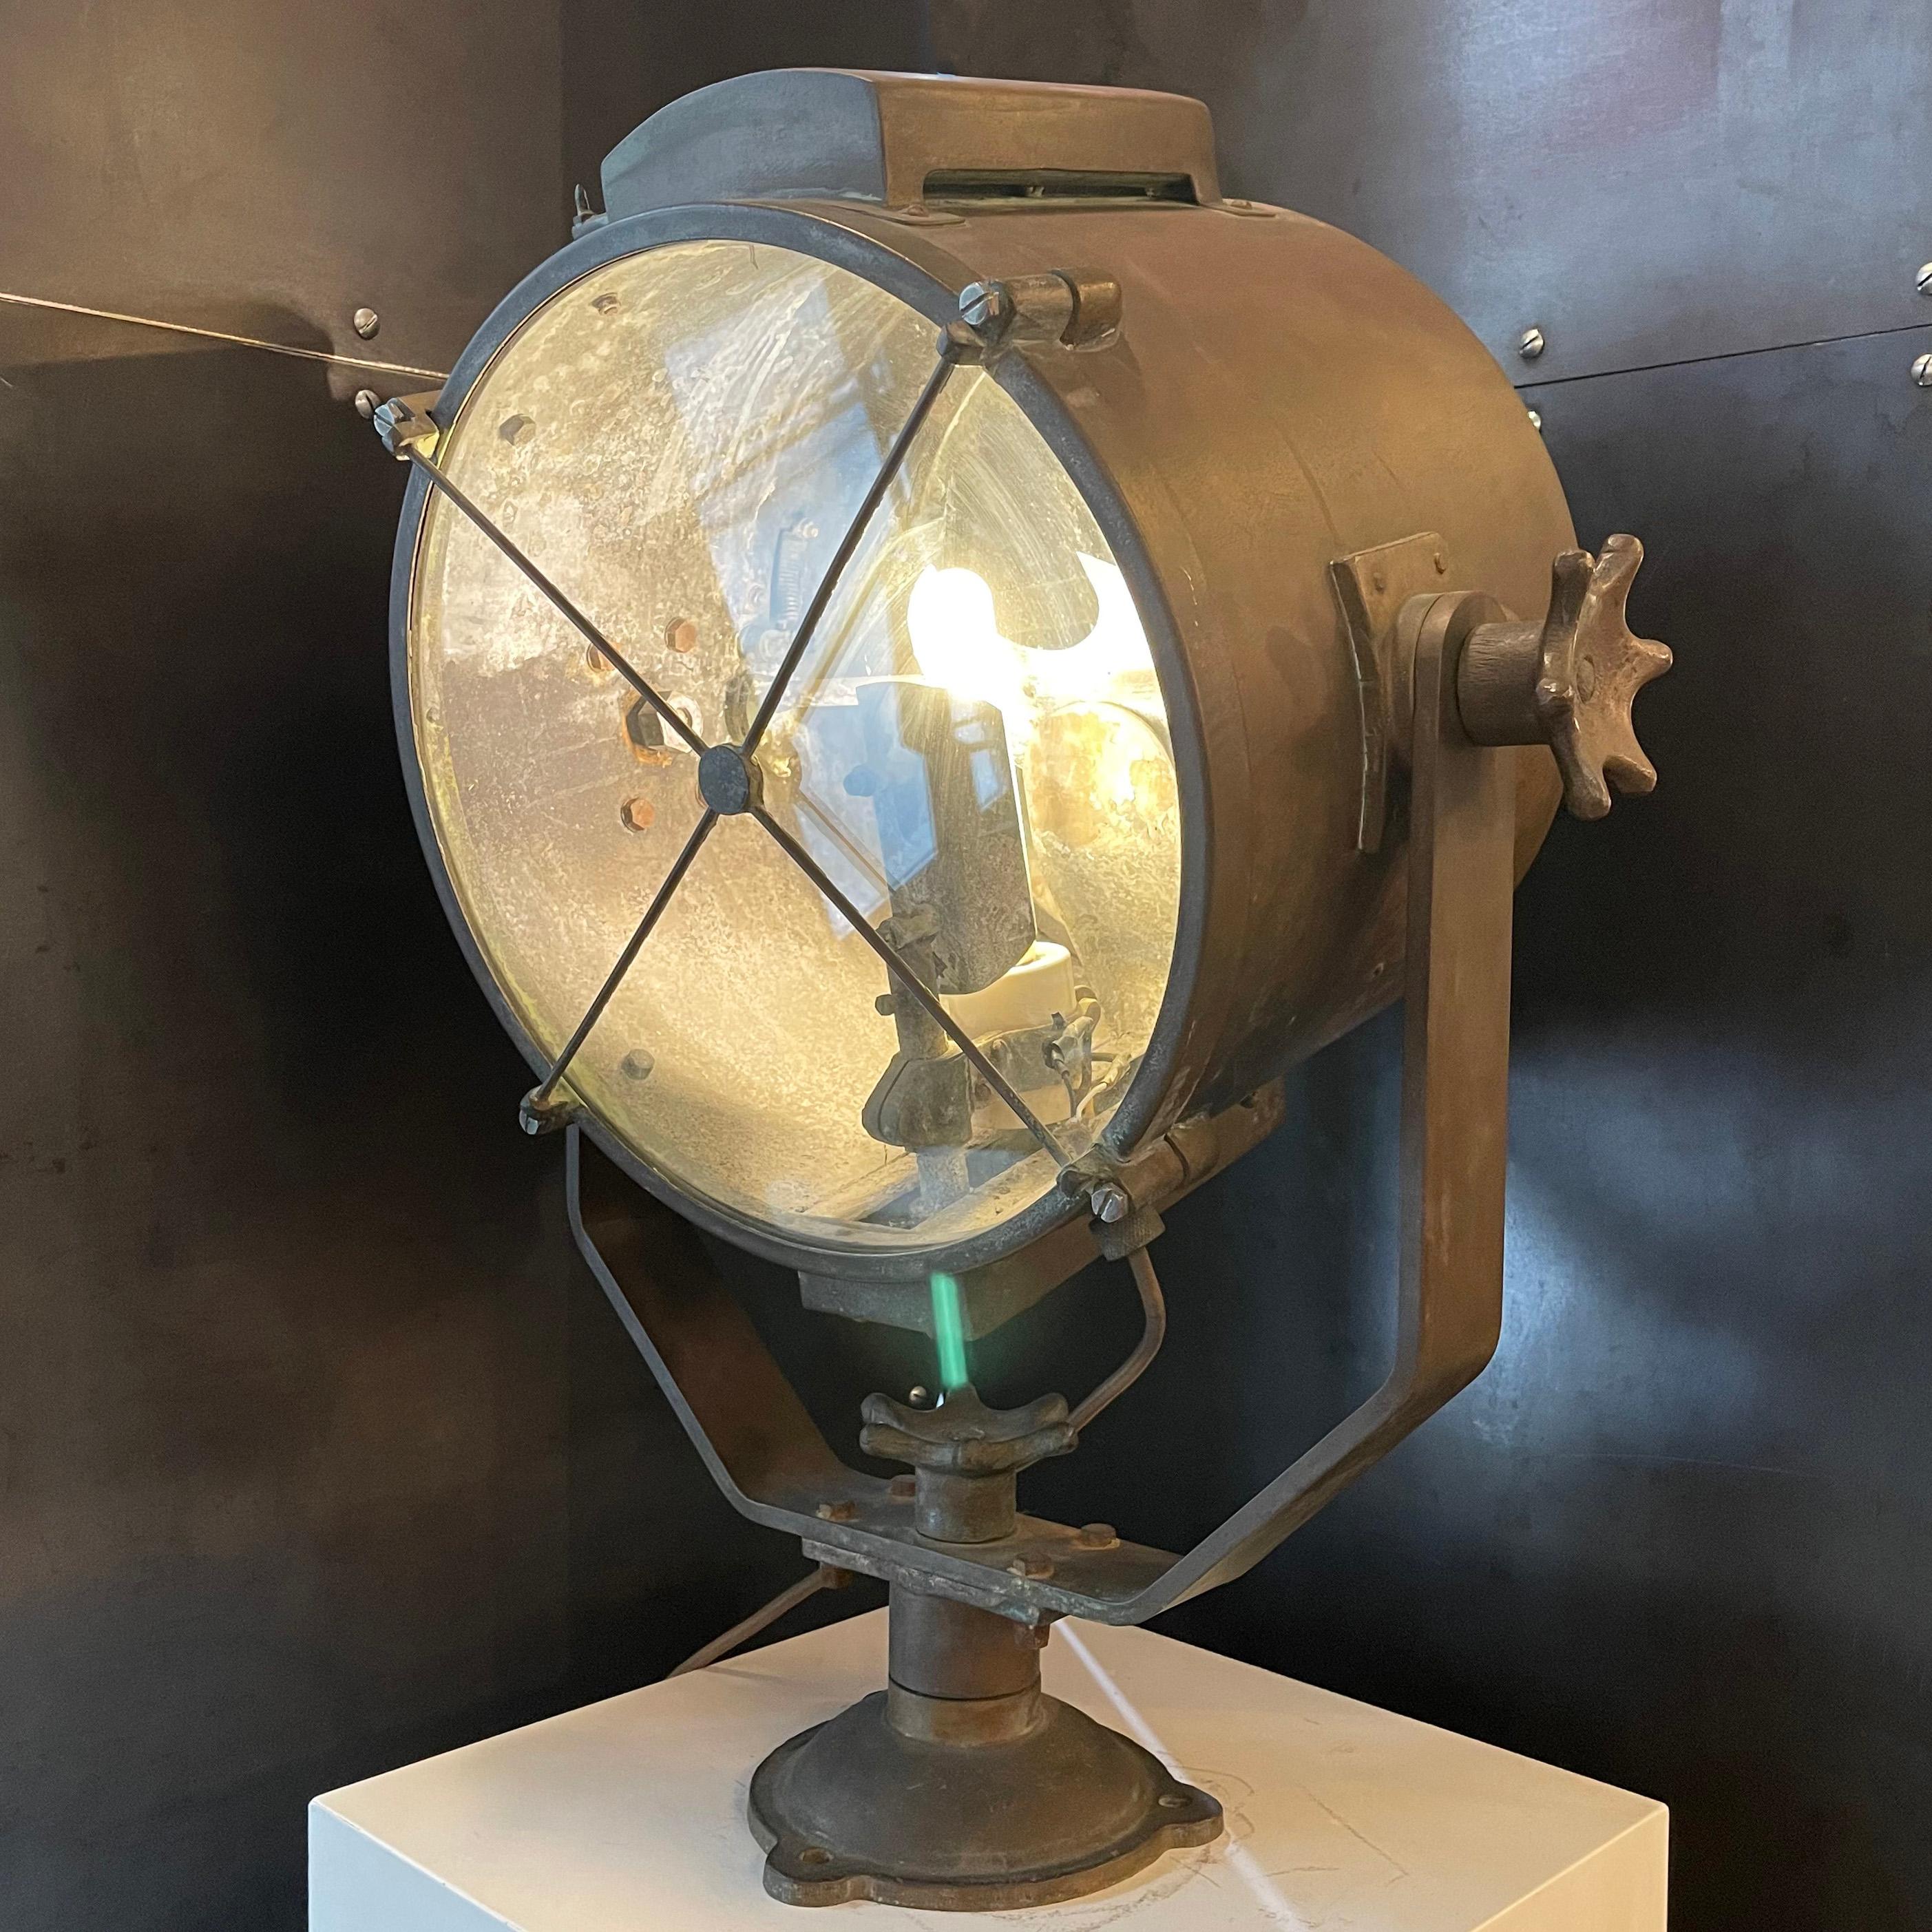 Impressive, antique, industrial, nautical, copper searchlight with glass shade, swivels 360 degrees horizontal and articulates 180 degrees lateral. The interior features a concave mirrored reflector and functioning signal diffuser. The copper